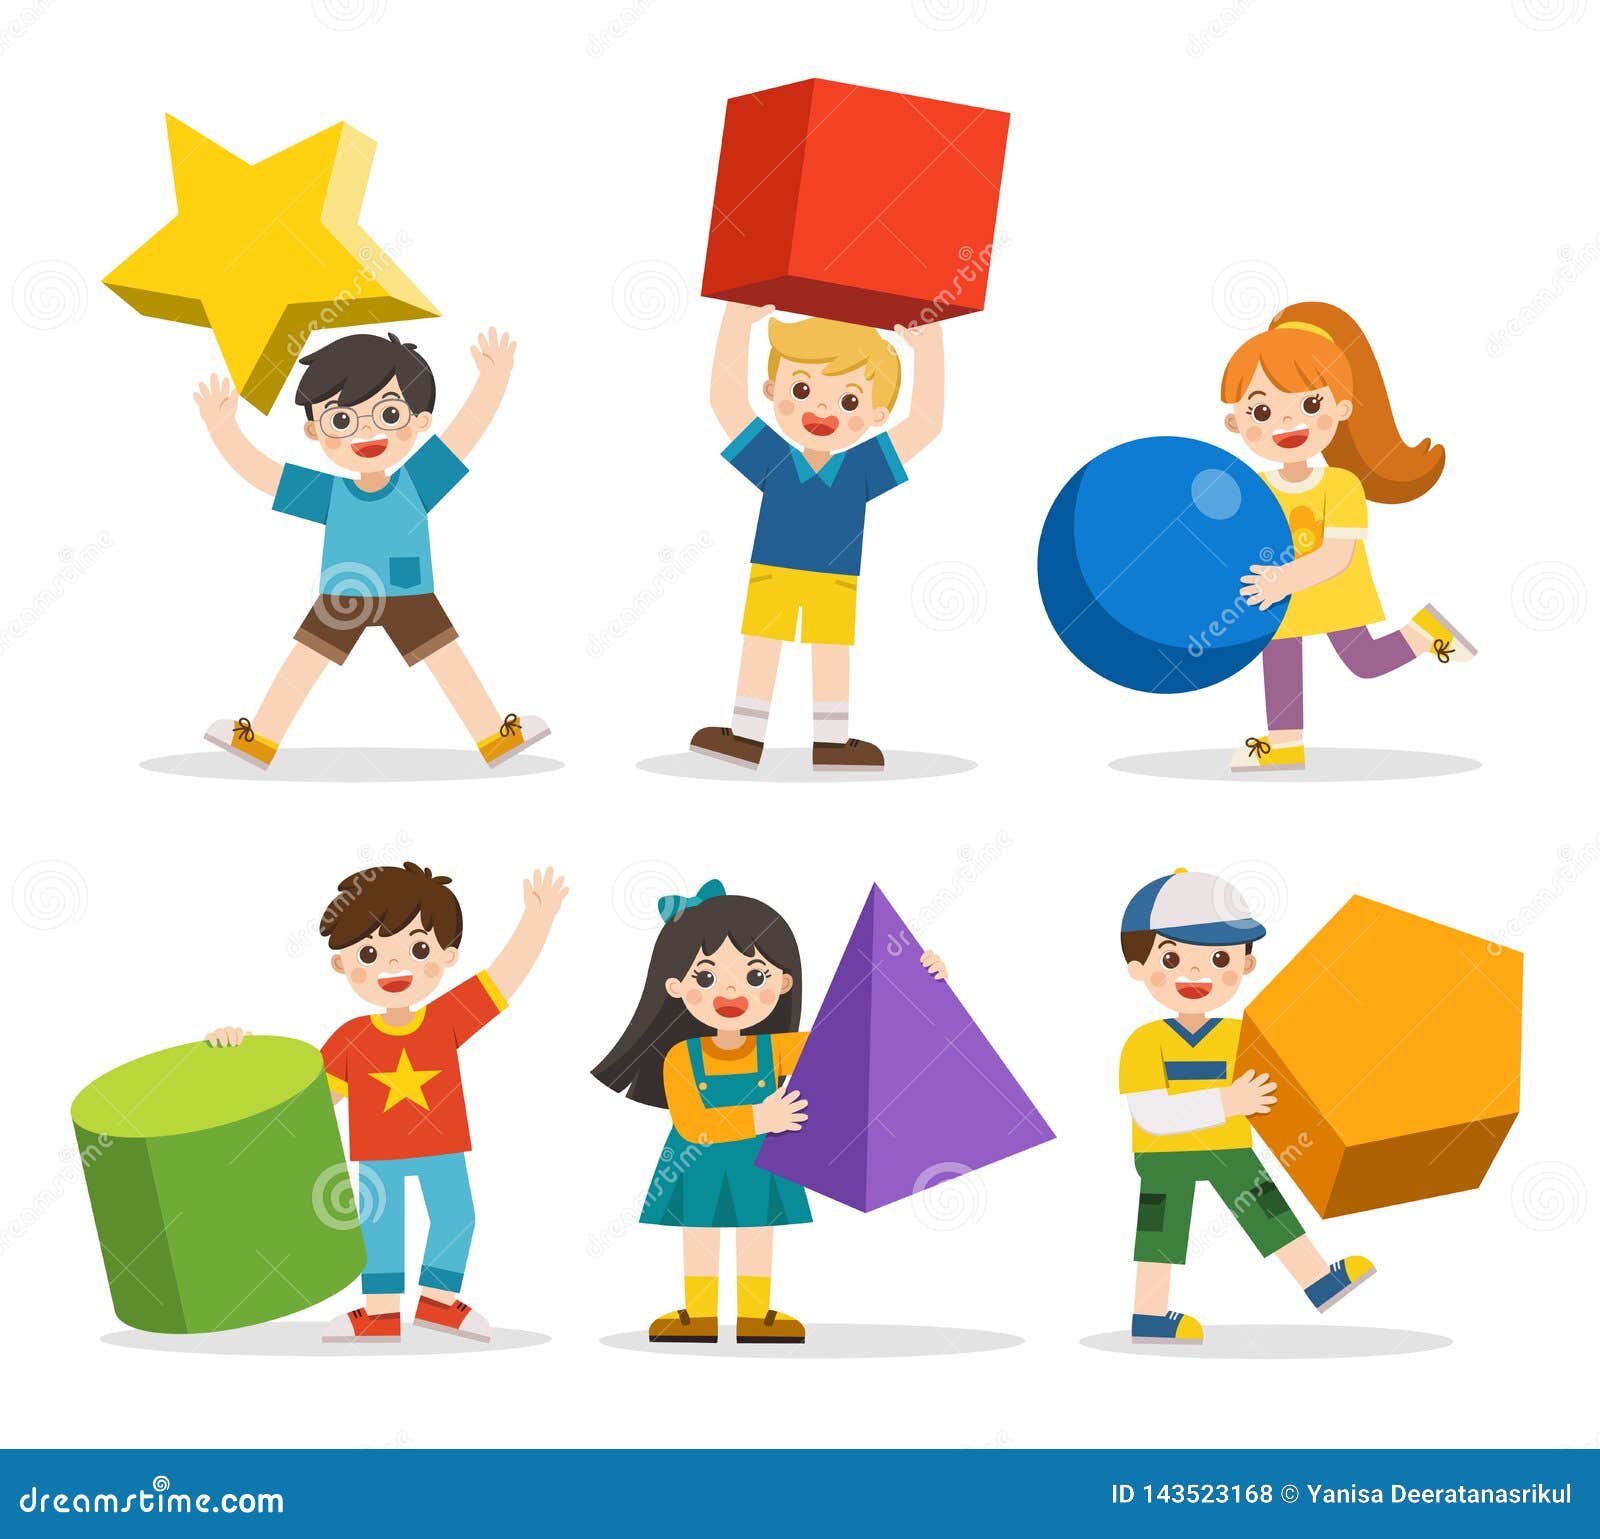 children with simple geometry forms. different geometric . educational geometry children.